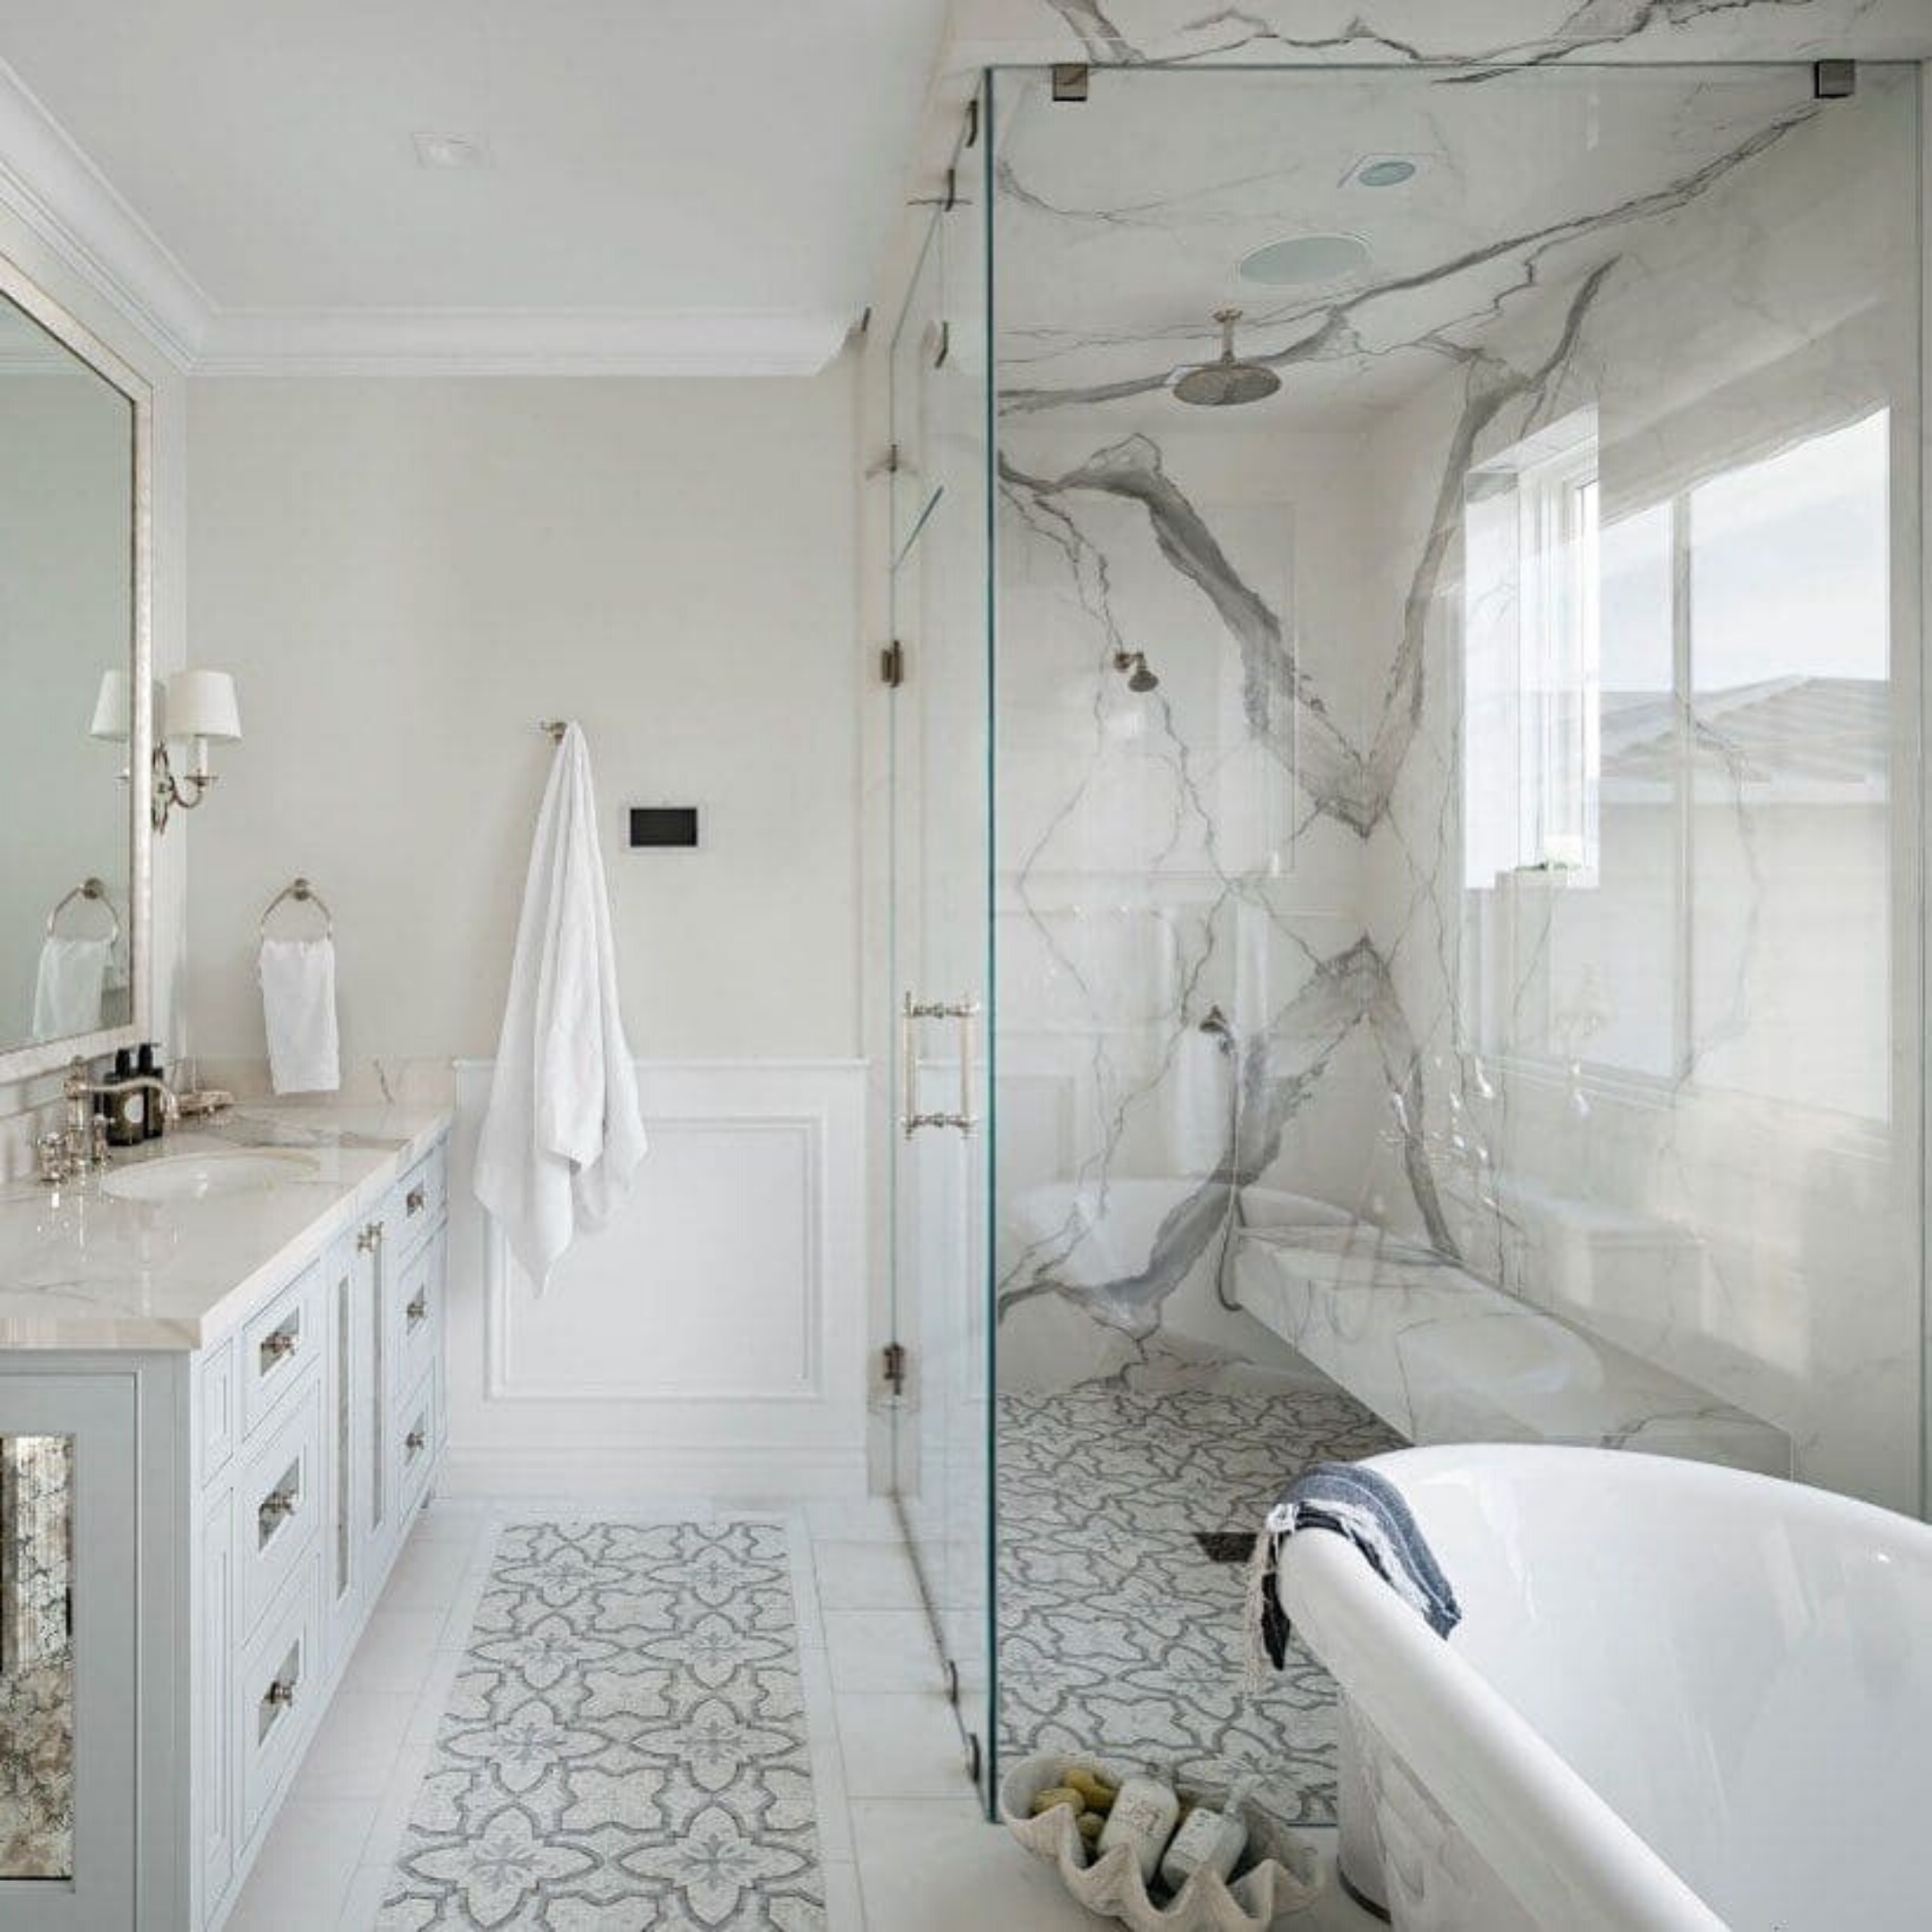 Primrose Bianco Grigio Marble Polished Mosaic Tile shown in the bathroom used on the floor for a luxe aesthetic 